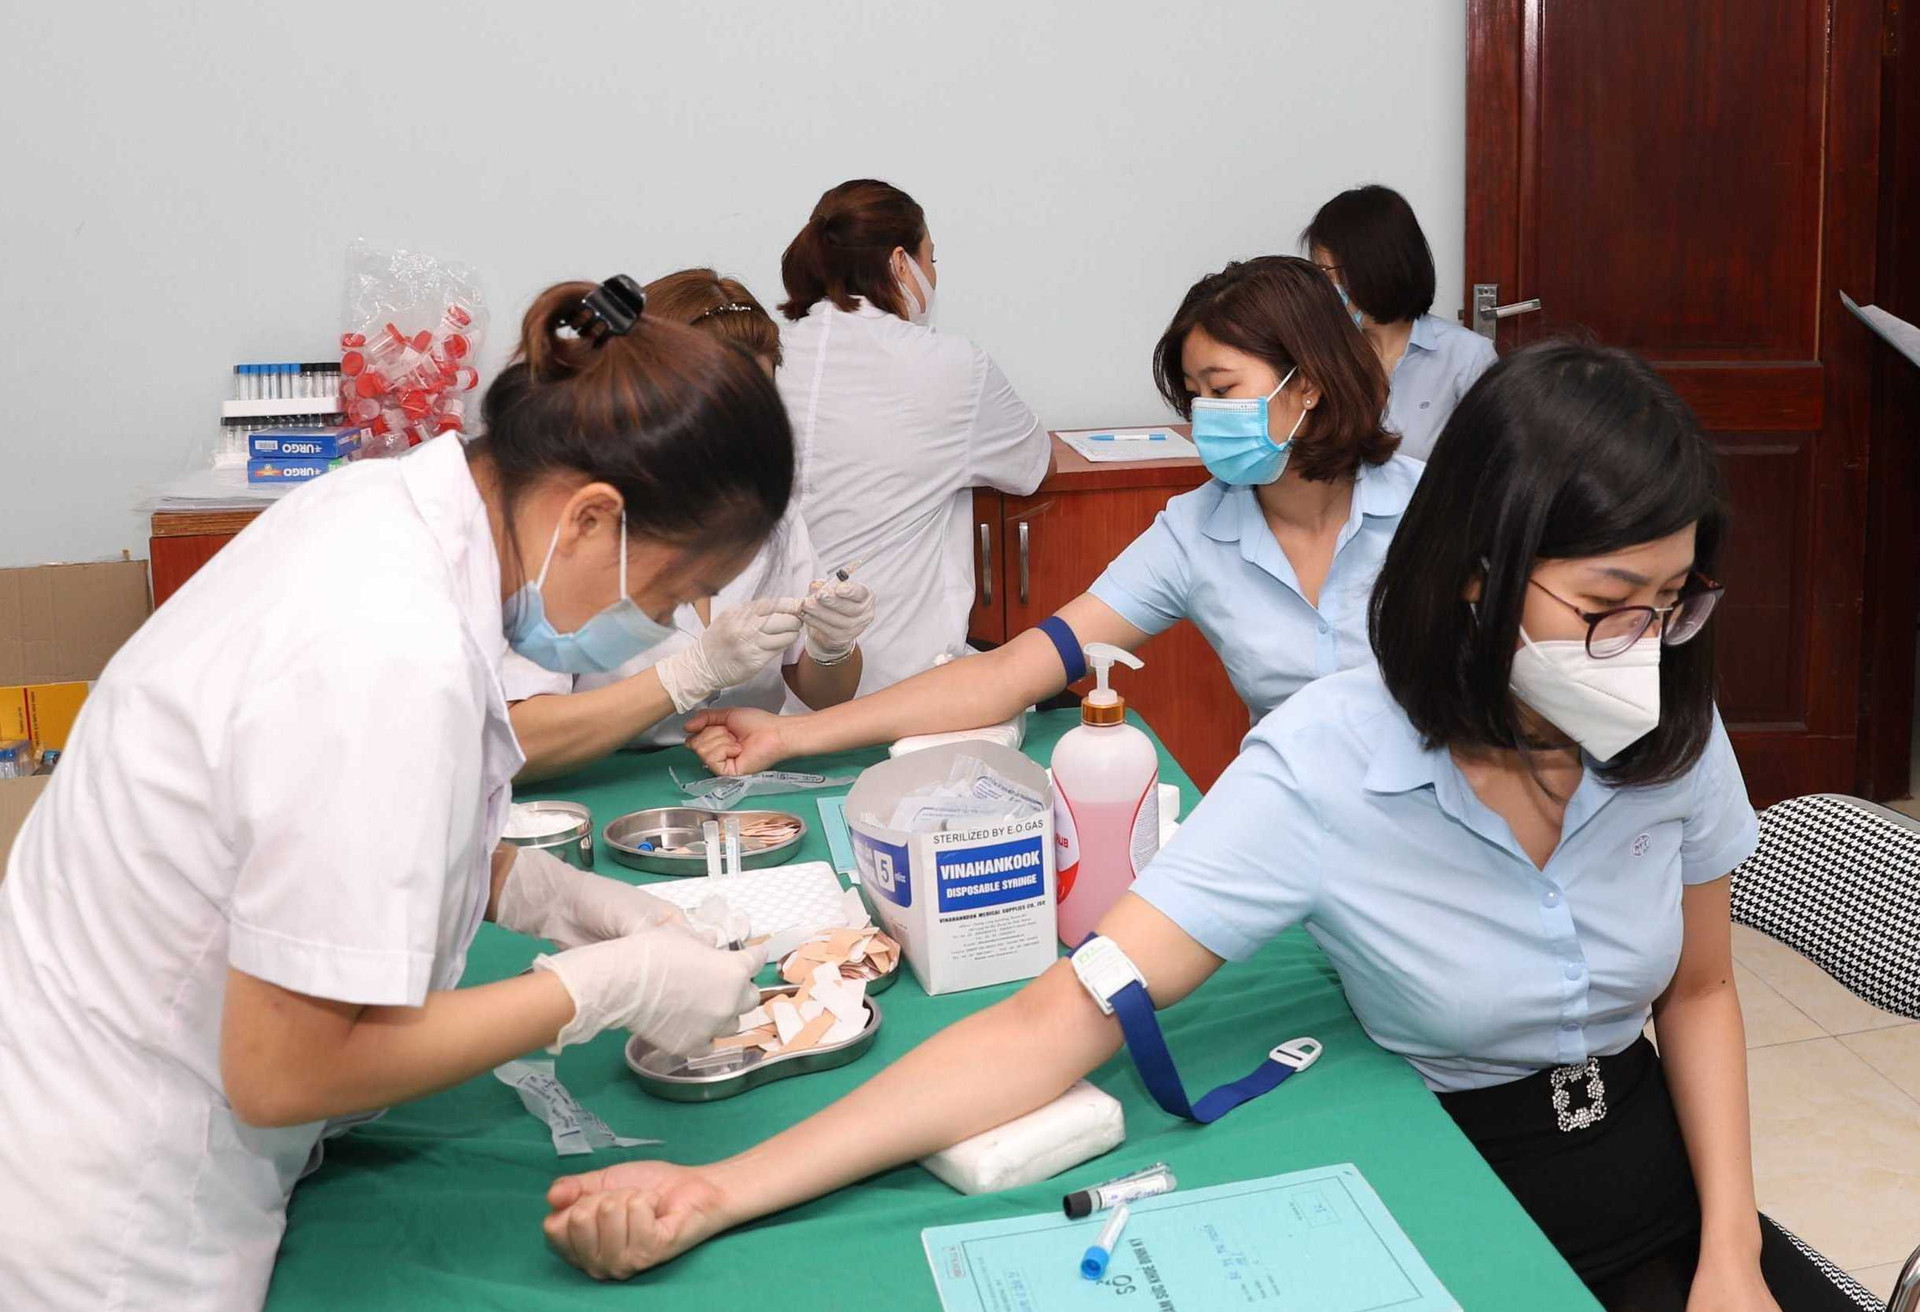 Is the enterprise in Vietnam obliged to provide healthcare and occupational disease check-ups?